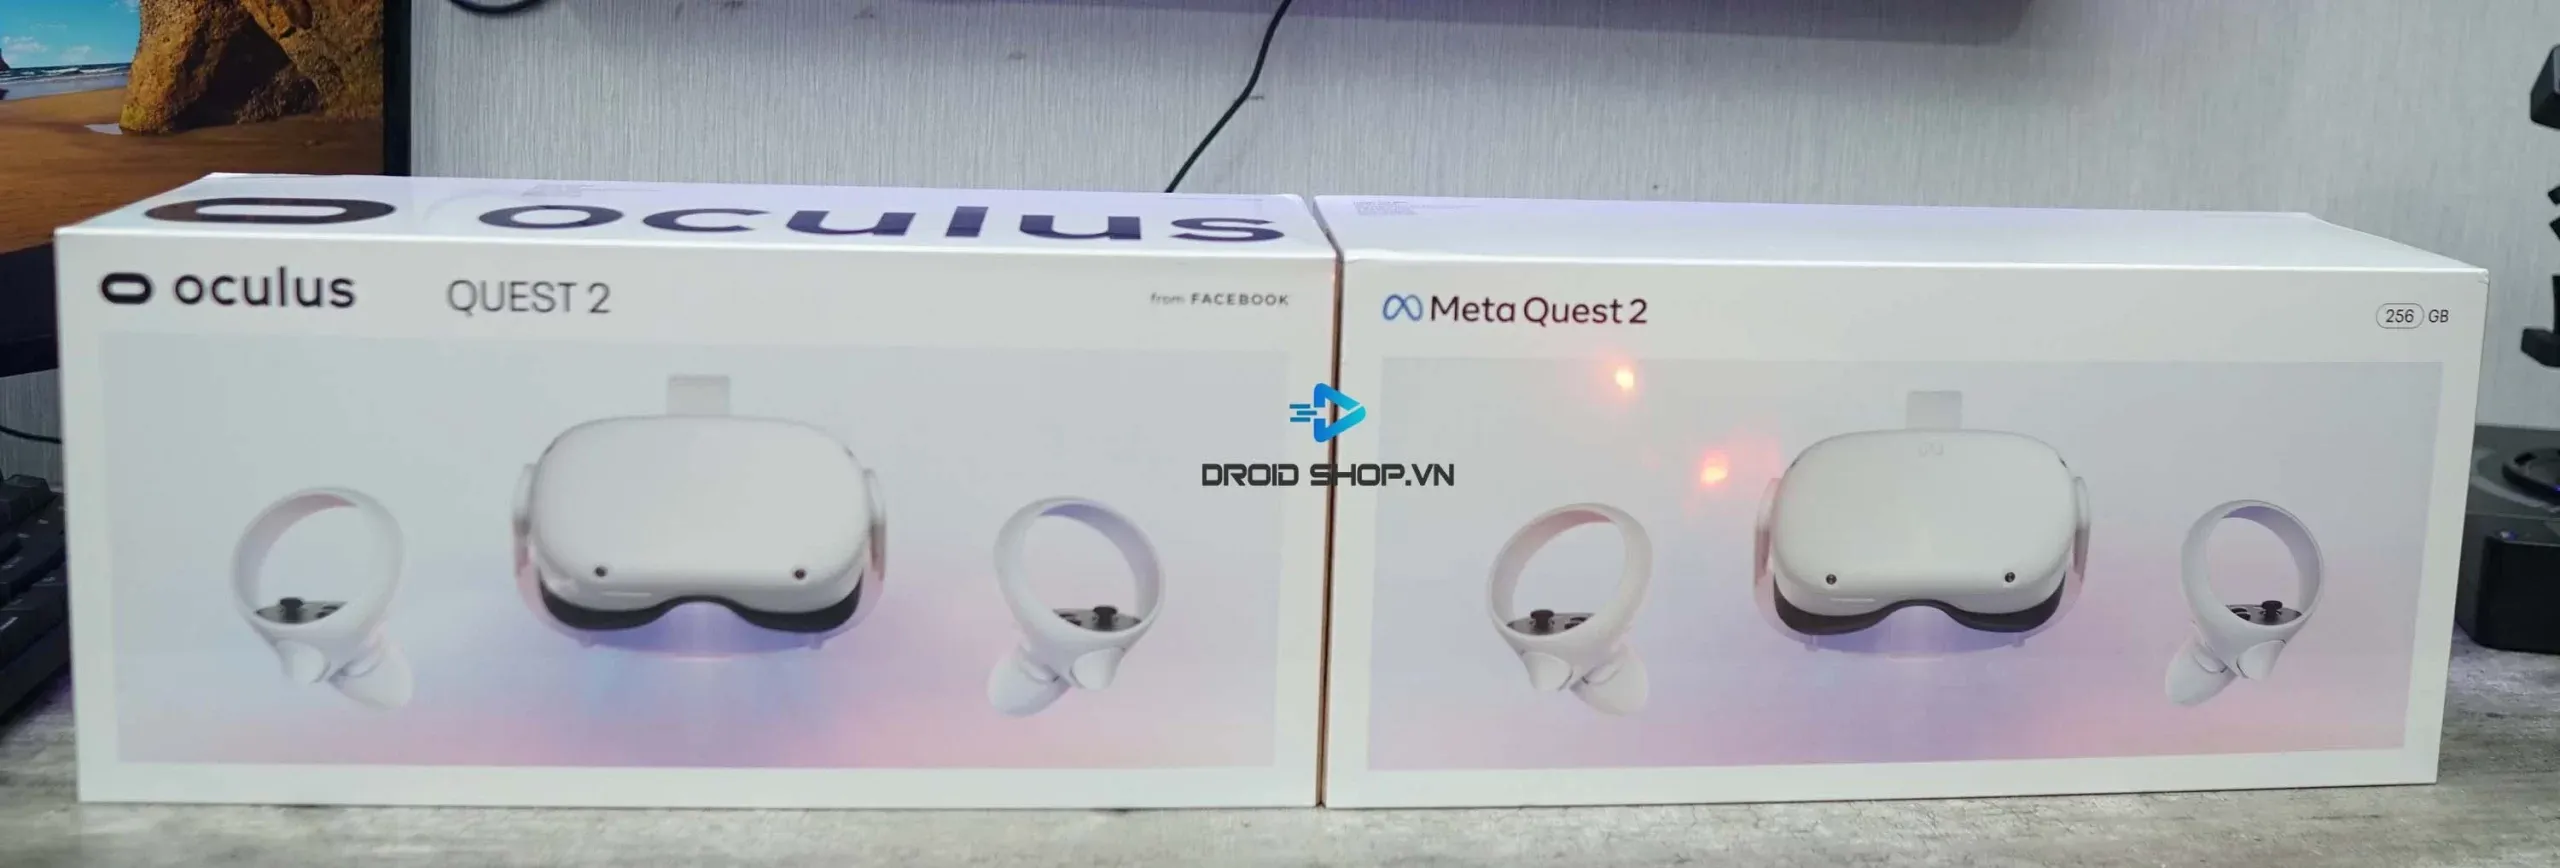 Oculus Quest 2 256 GB Virtual Reality Headset - META Quest 2 256